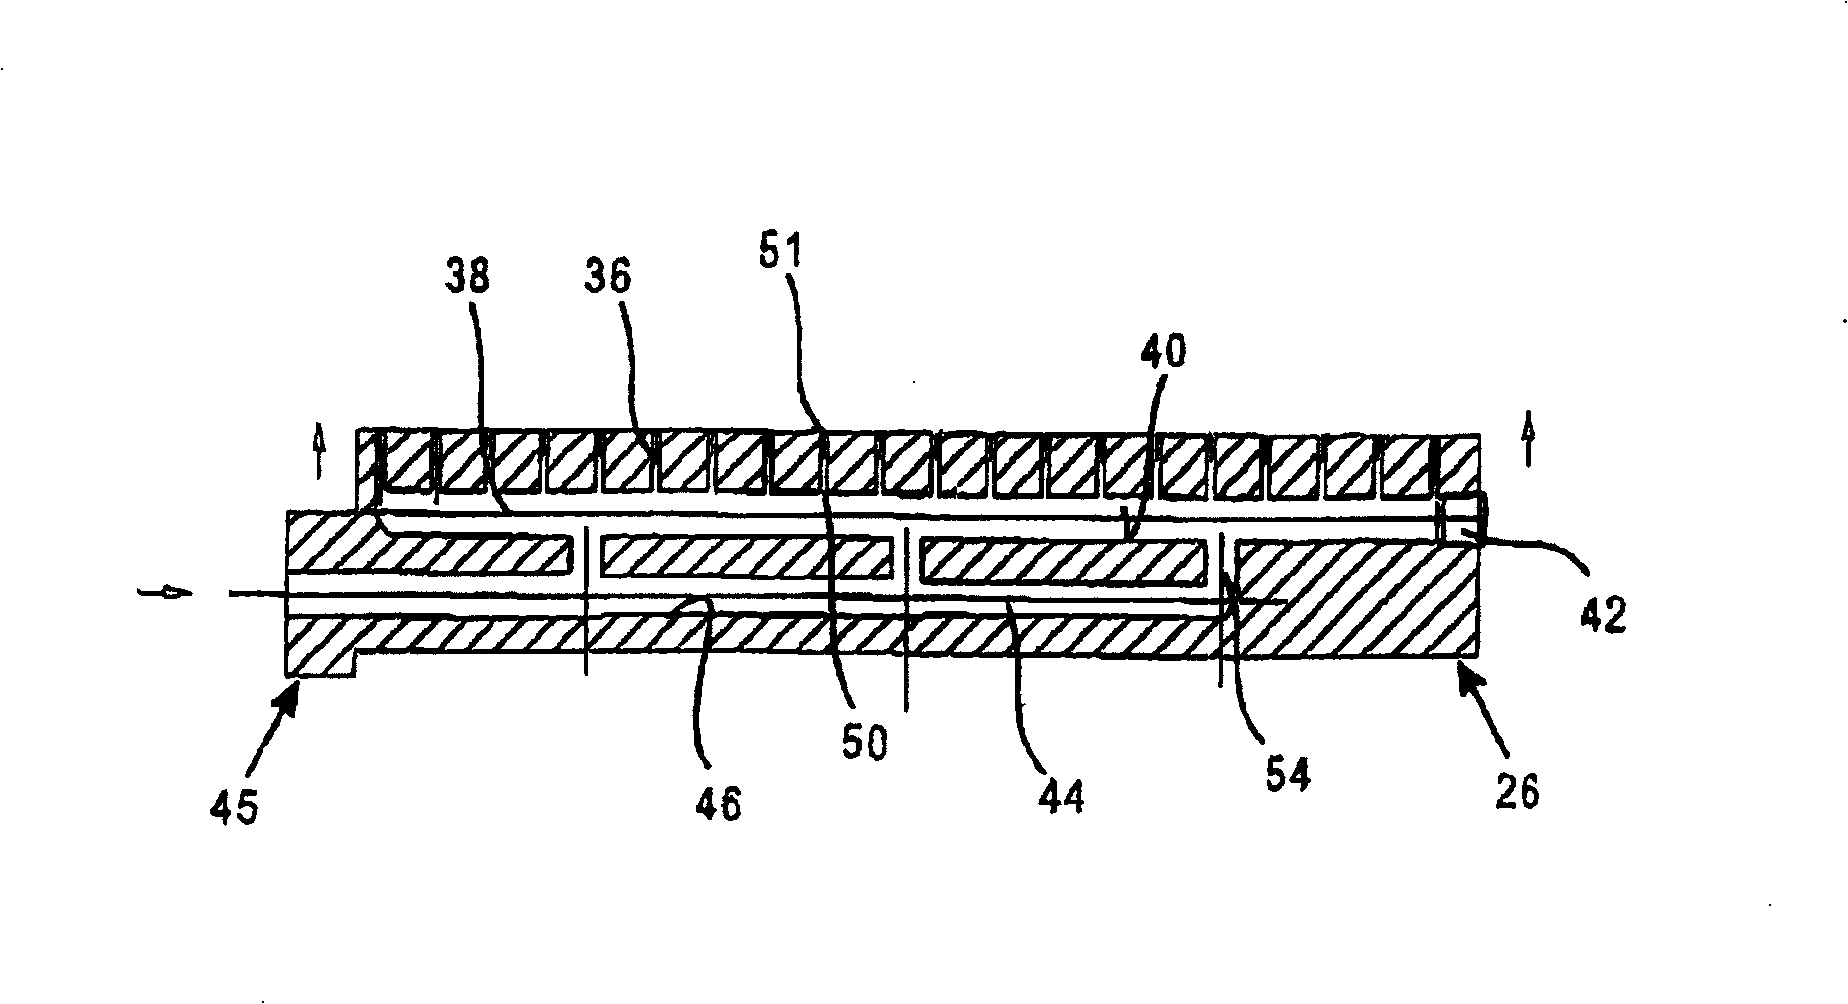 Nozzle assembly for applying a liquid to a substrate